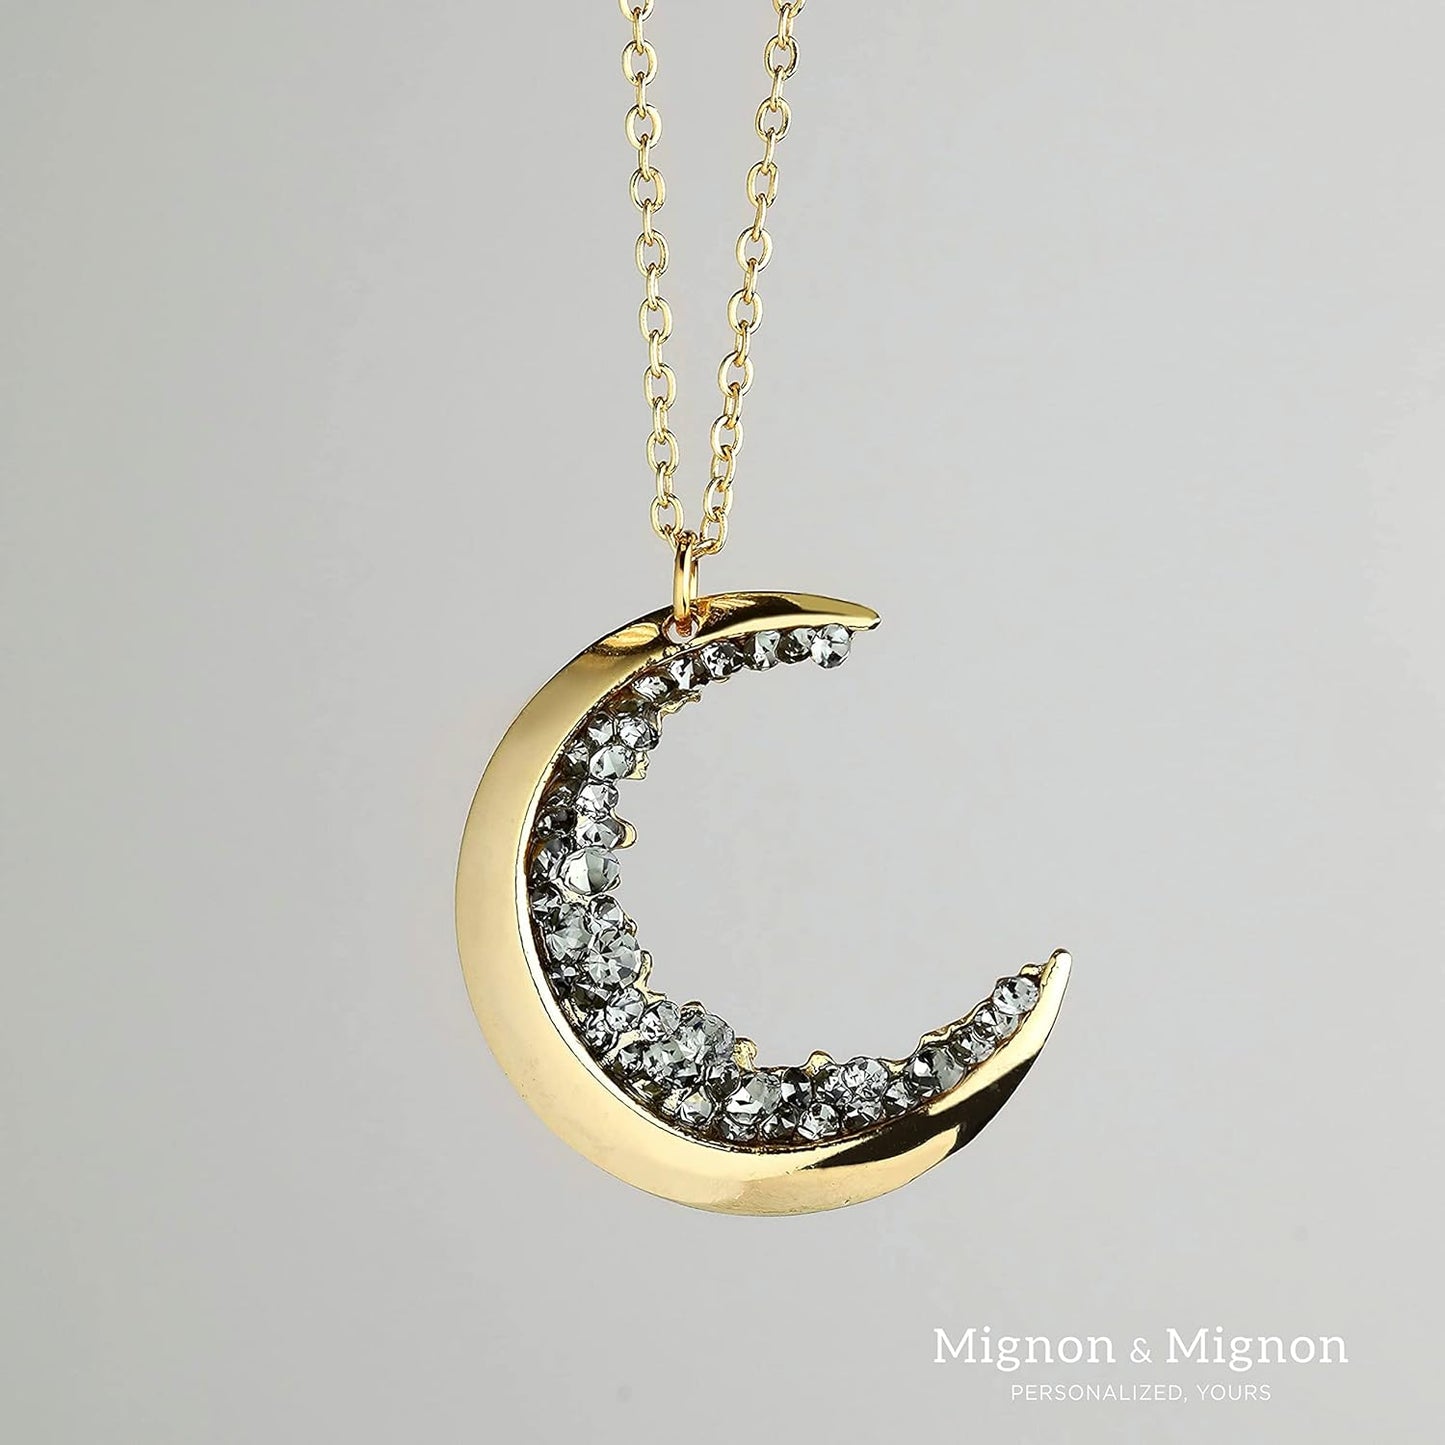 16k Gold Plated Crescent Moon Necklace with Black Crystals Mother's Day Gifts